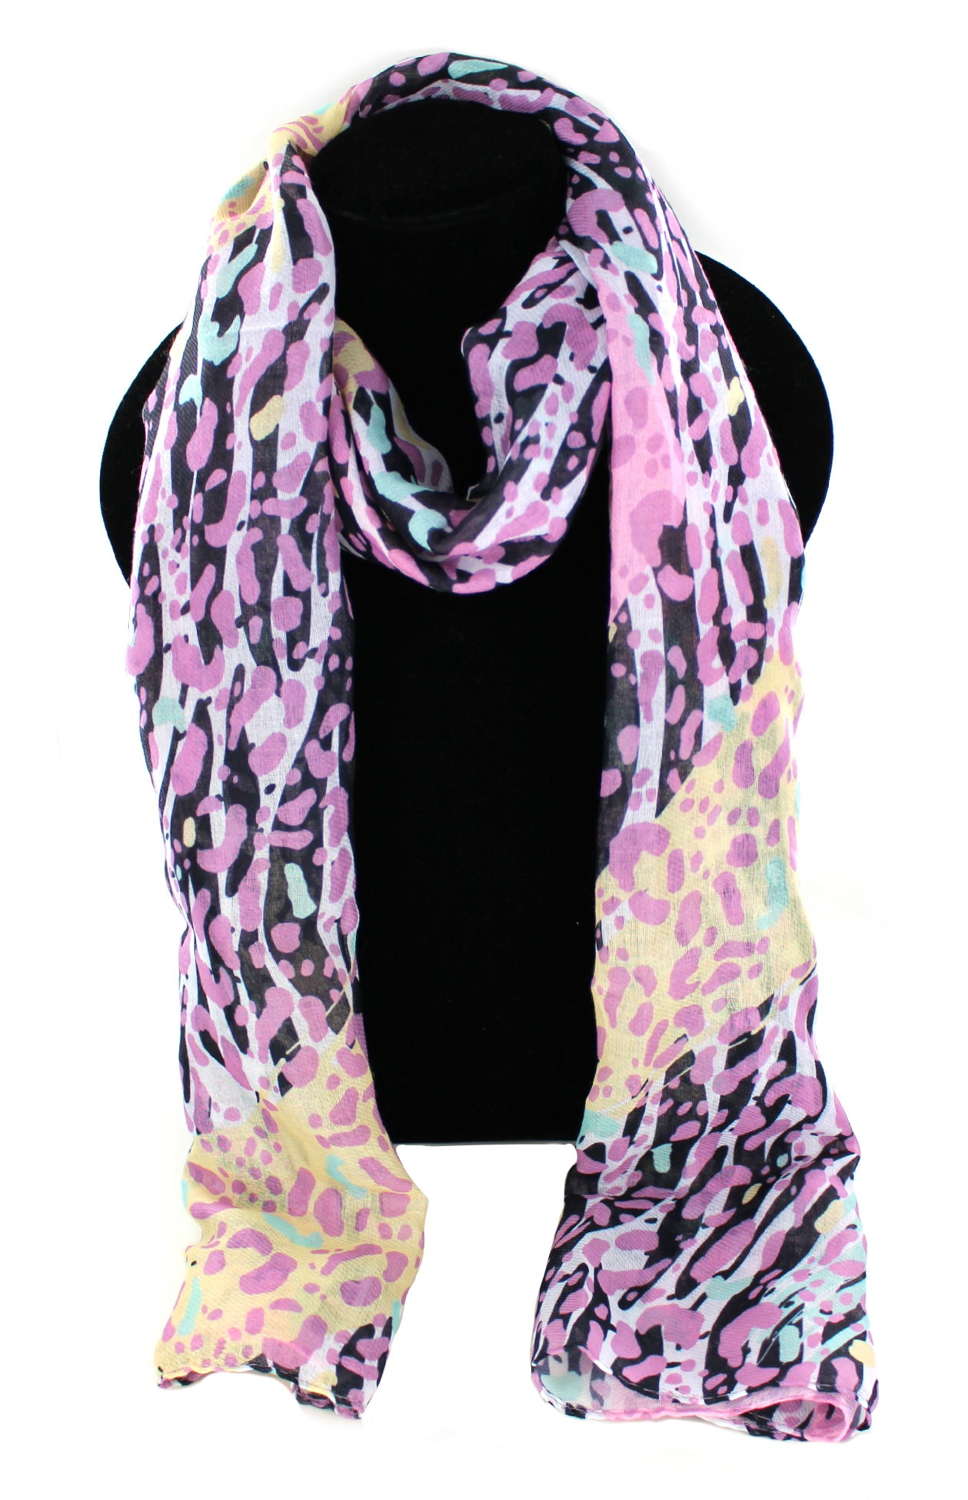 Colourful animal print recycled Polyester scarf.